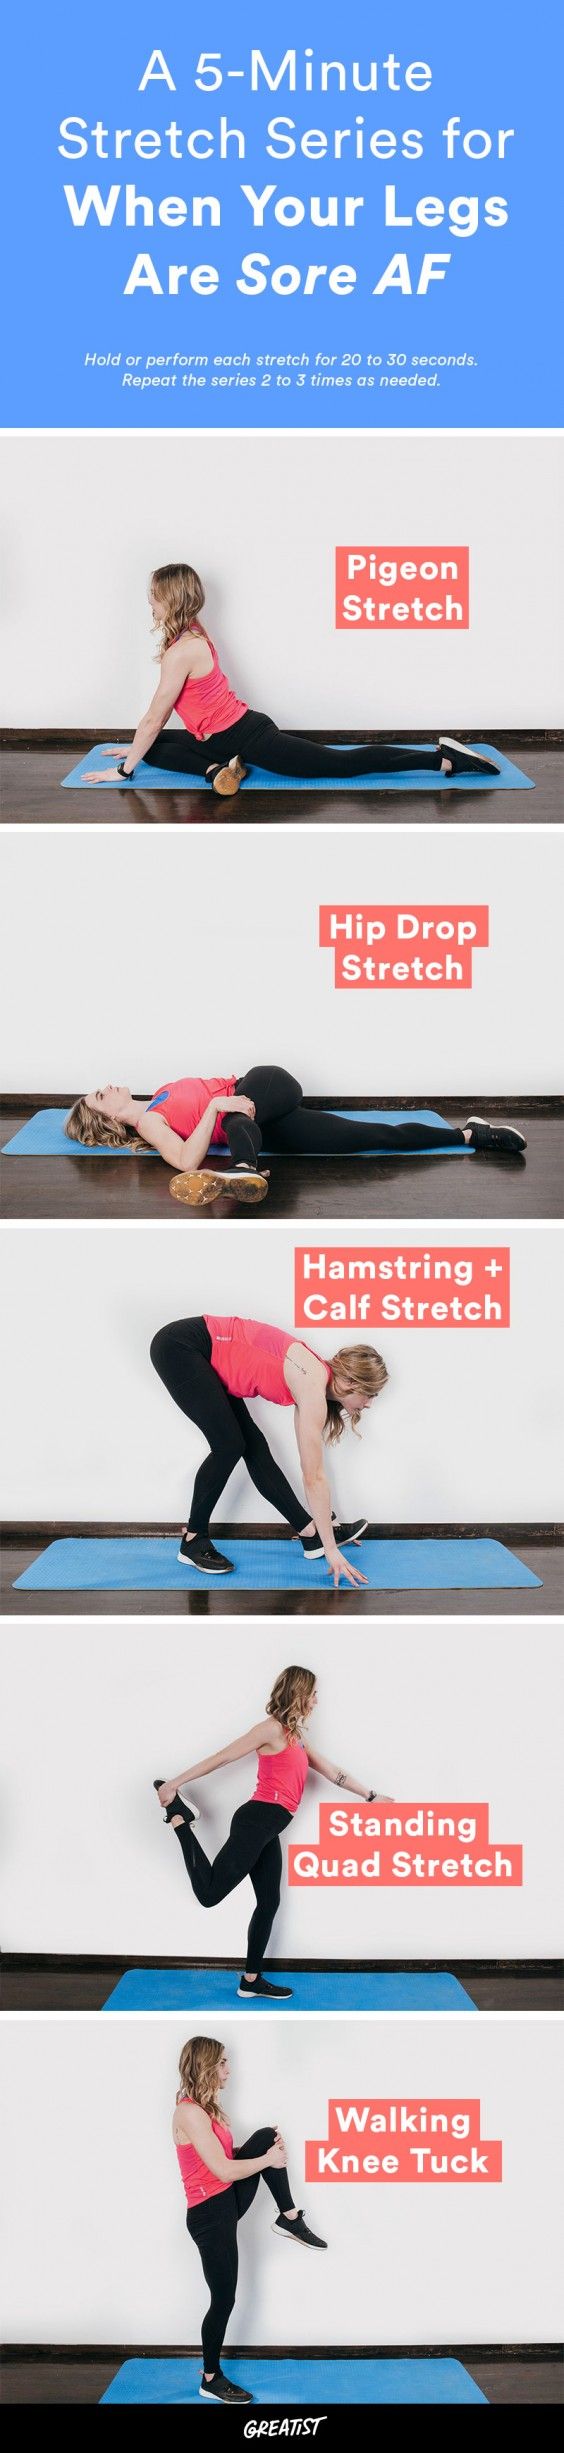 Best Lower Body Stretches